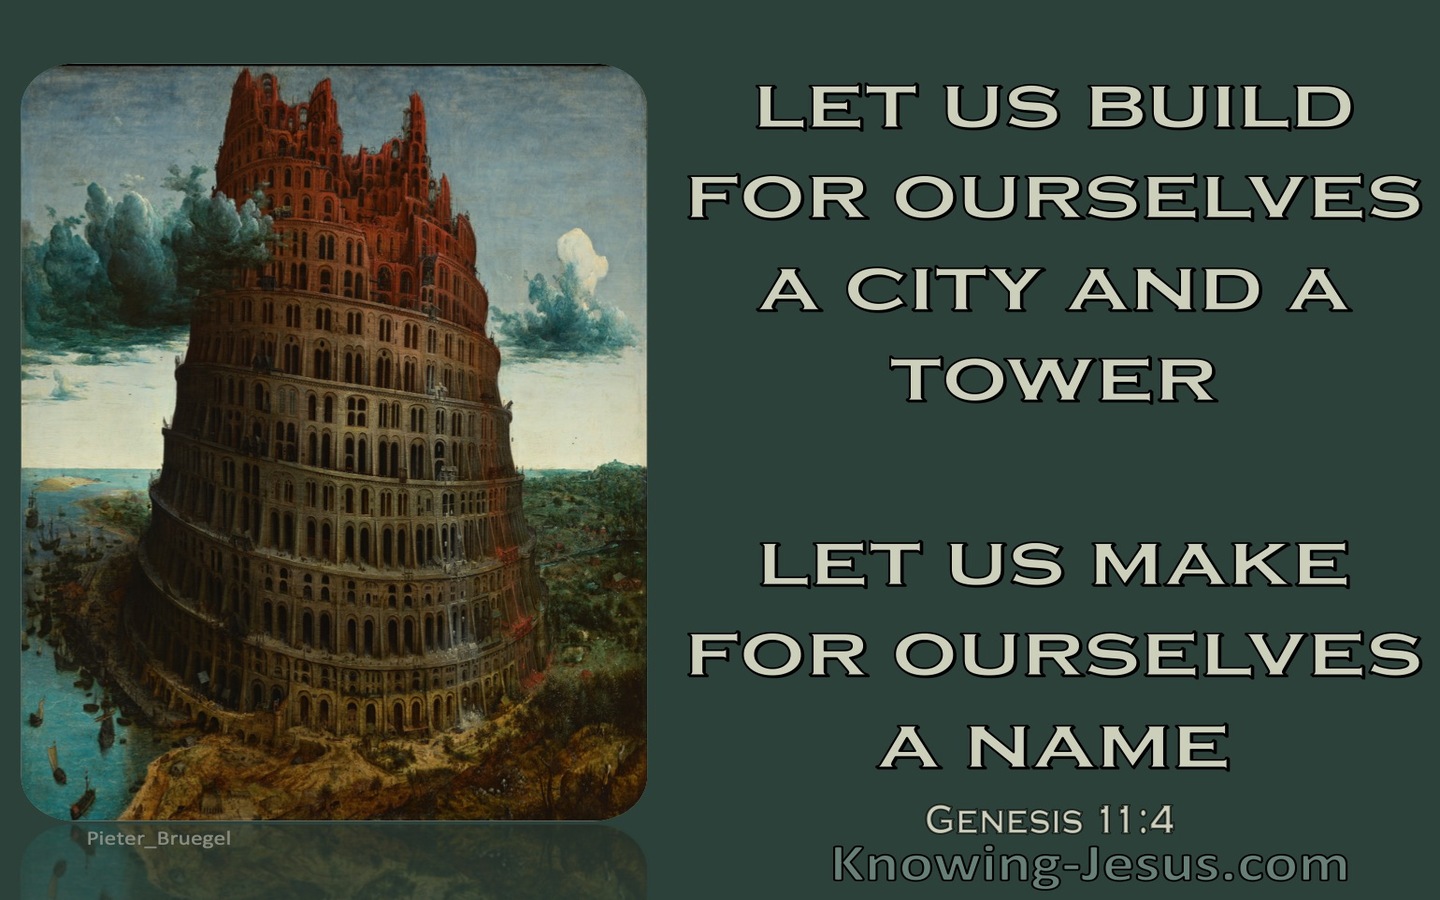 Genesis 11:4 Let Us Build A Tower For Ourselves (aqua)